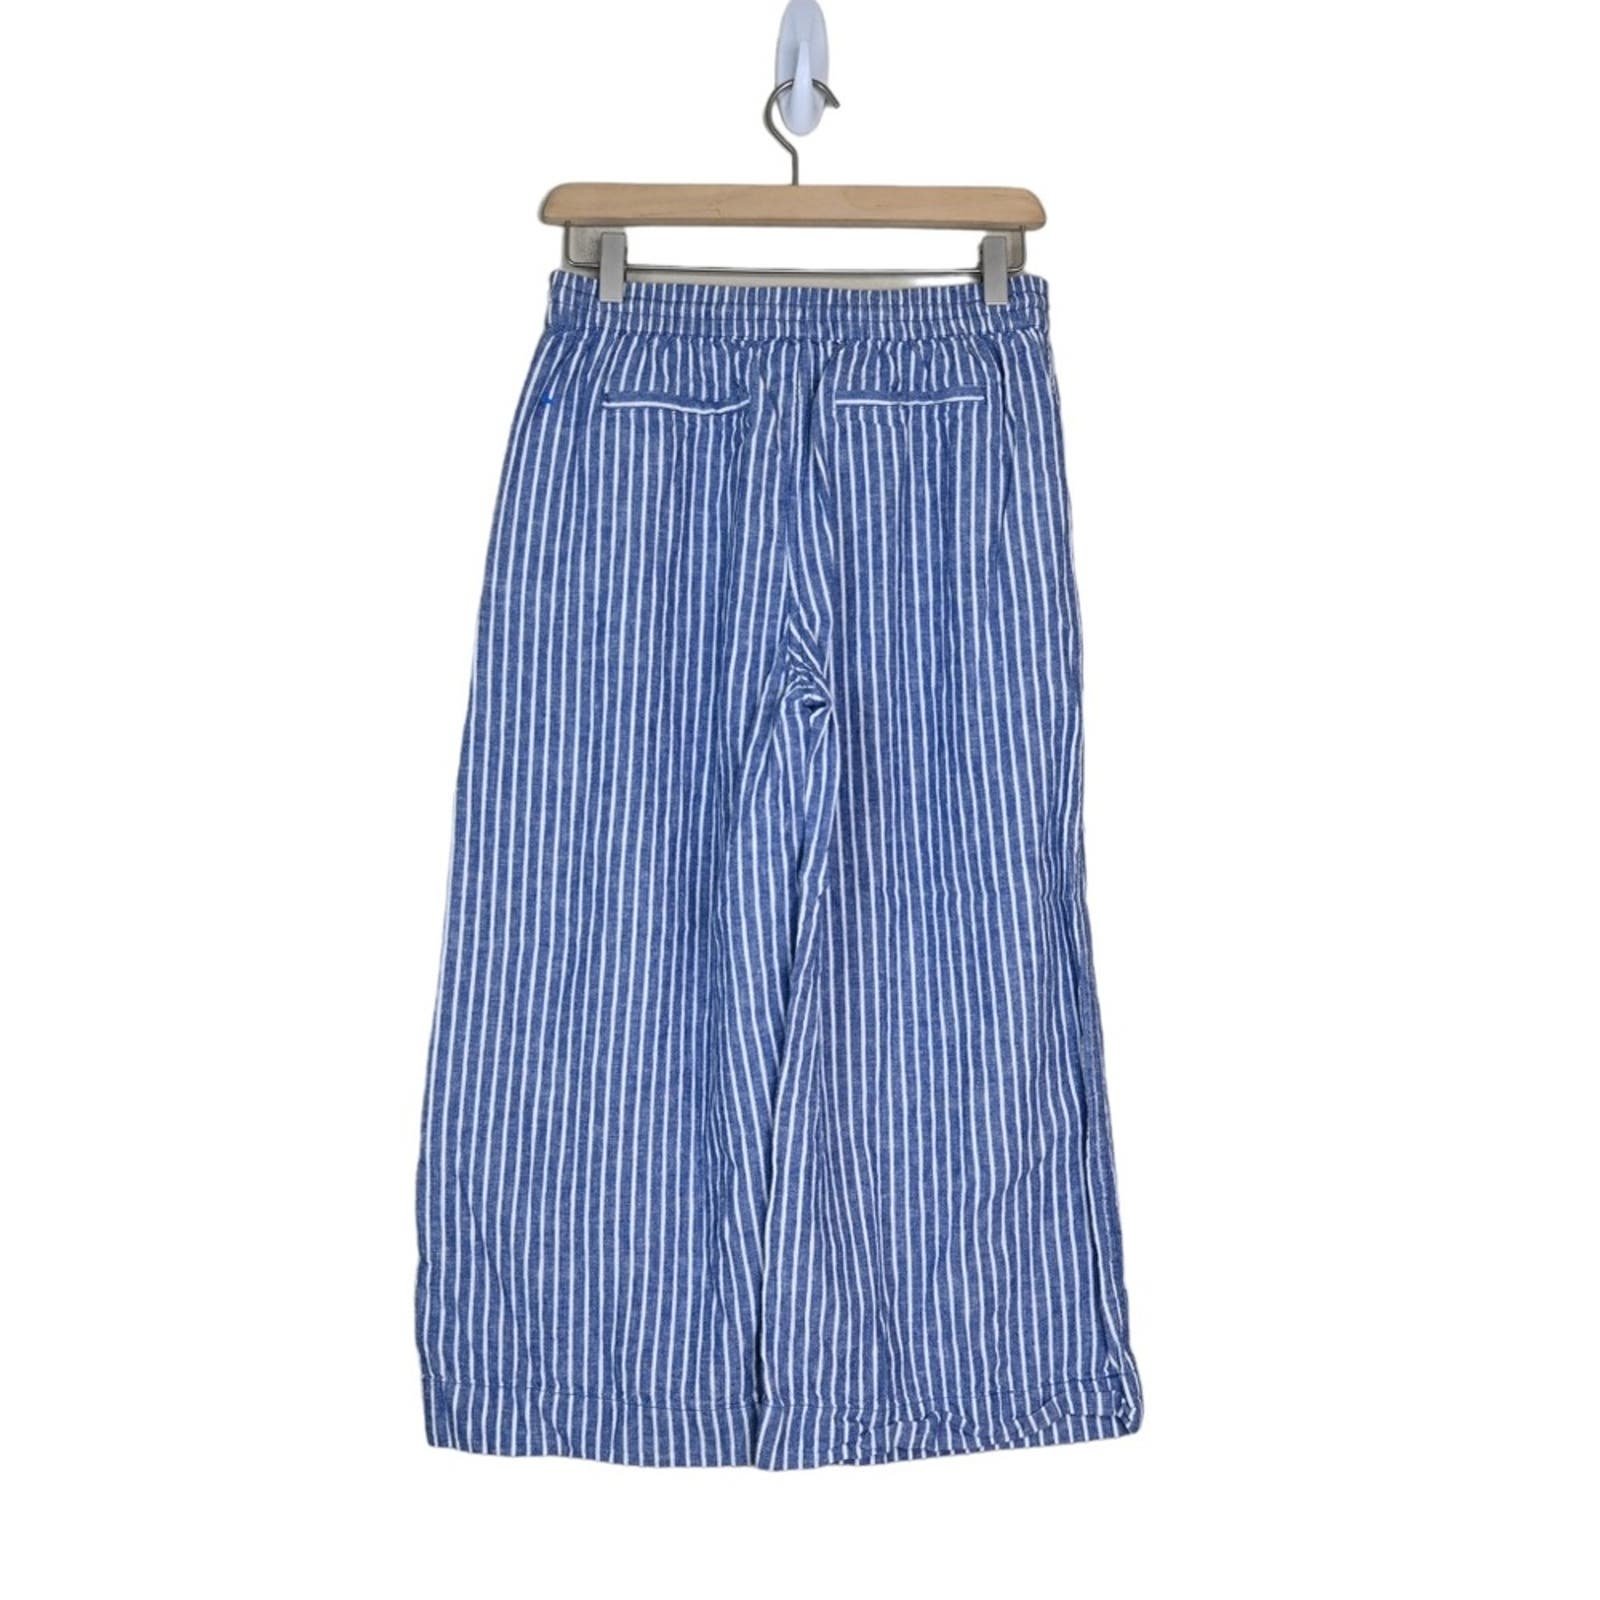 Discounted Beachlunchlounge Womens S Margot Drawstring Striped Linen Blend Pants mKvt7Eqgy Outlet Store